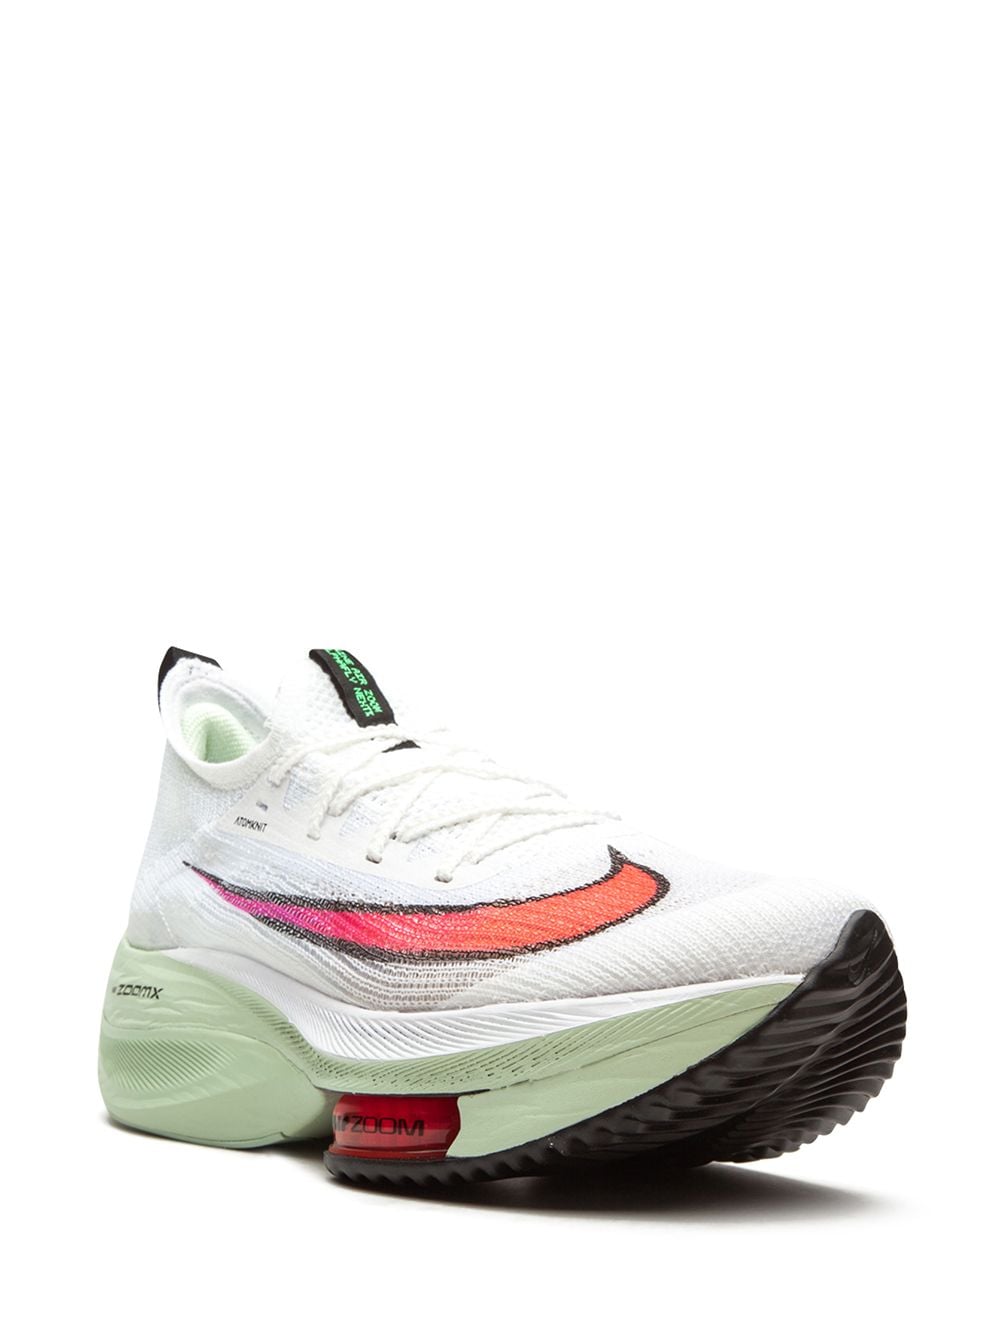 Image 2 of Nike Air Zoom Alphafly Next% sneakers